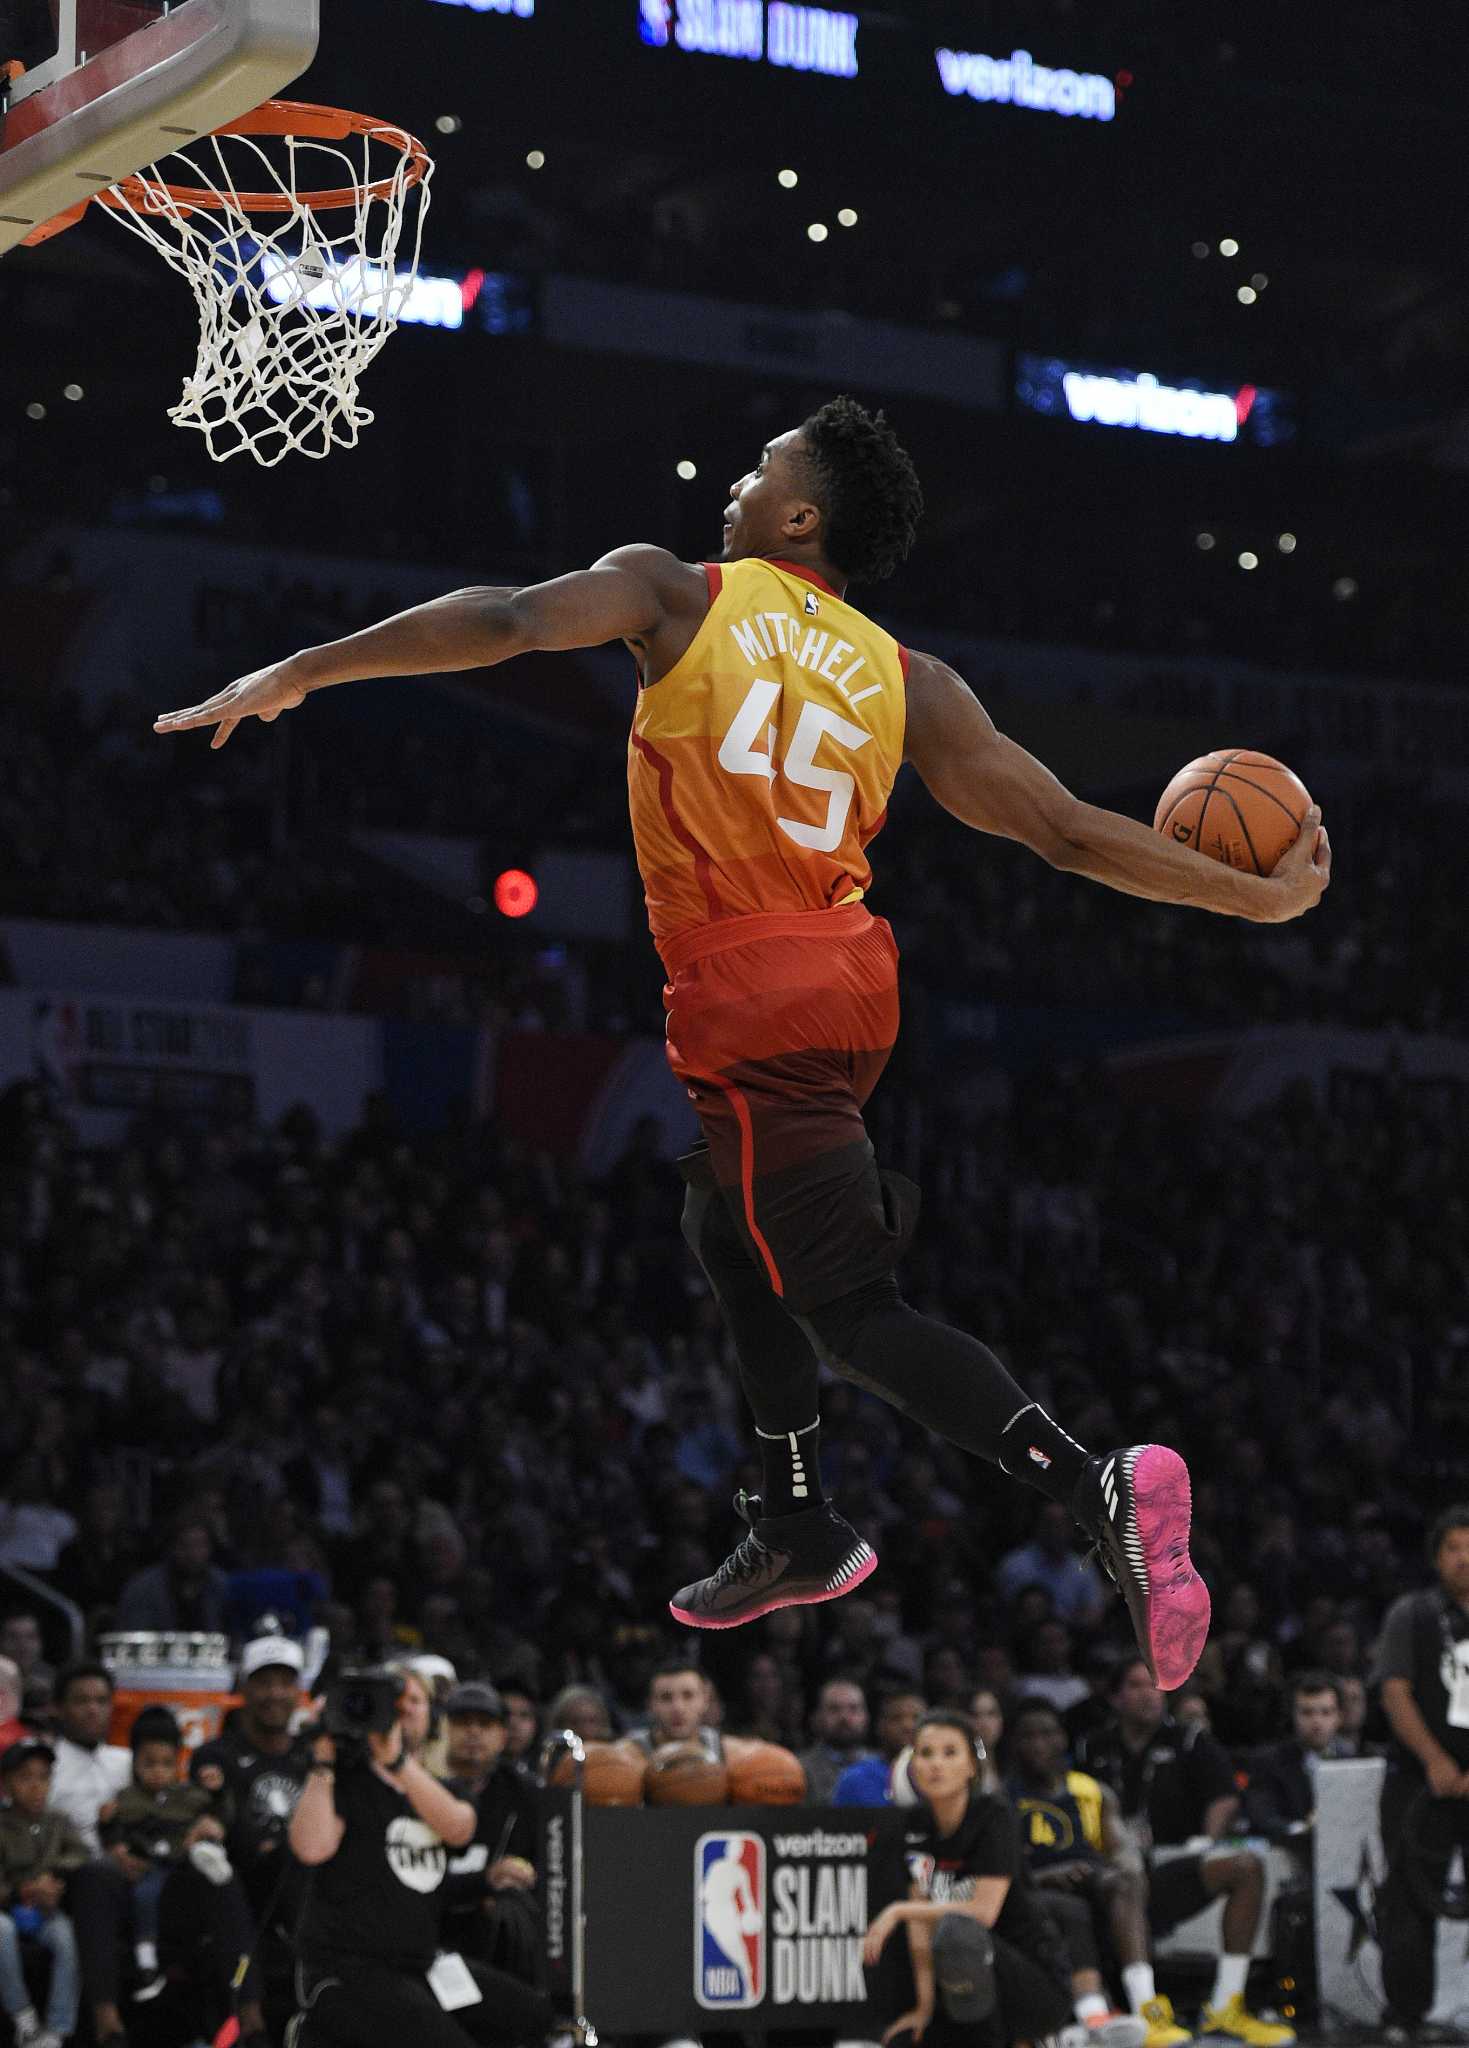 Donovan Mitchell swings into Dunk Contest and leaves with trophy - SLC Dunk